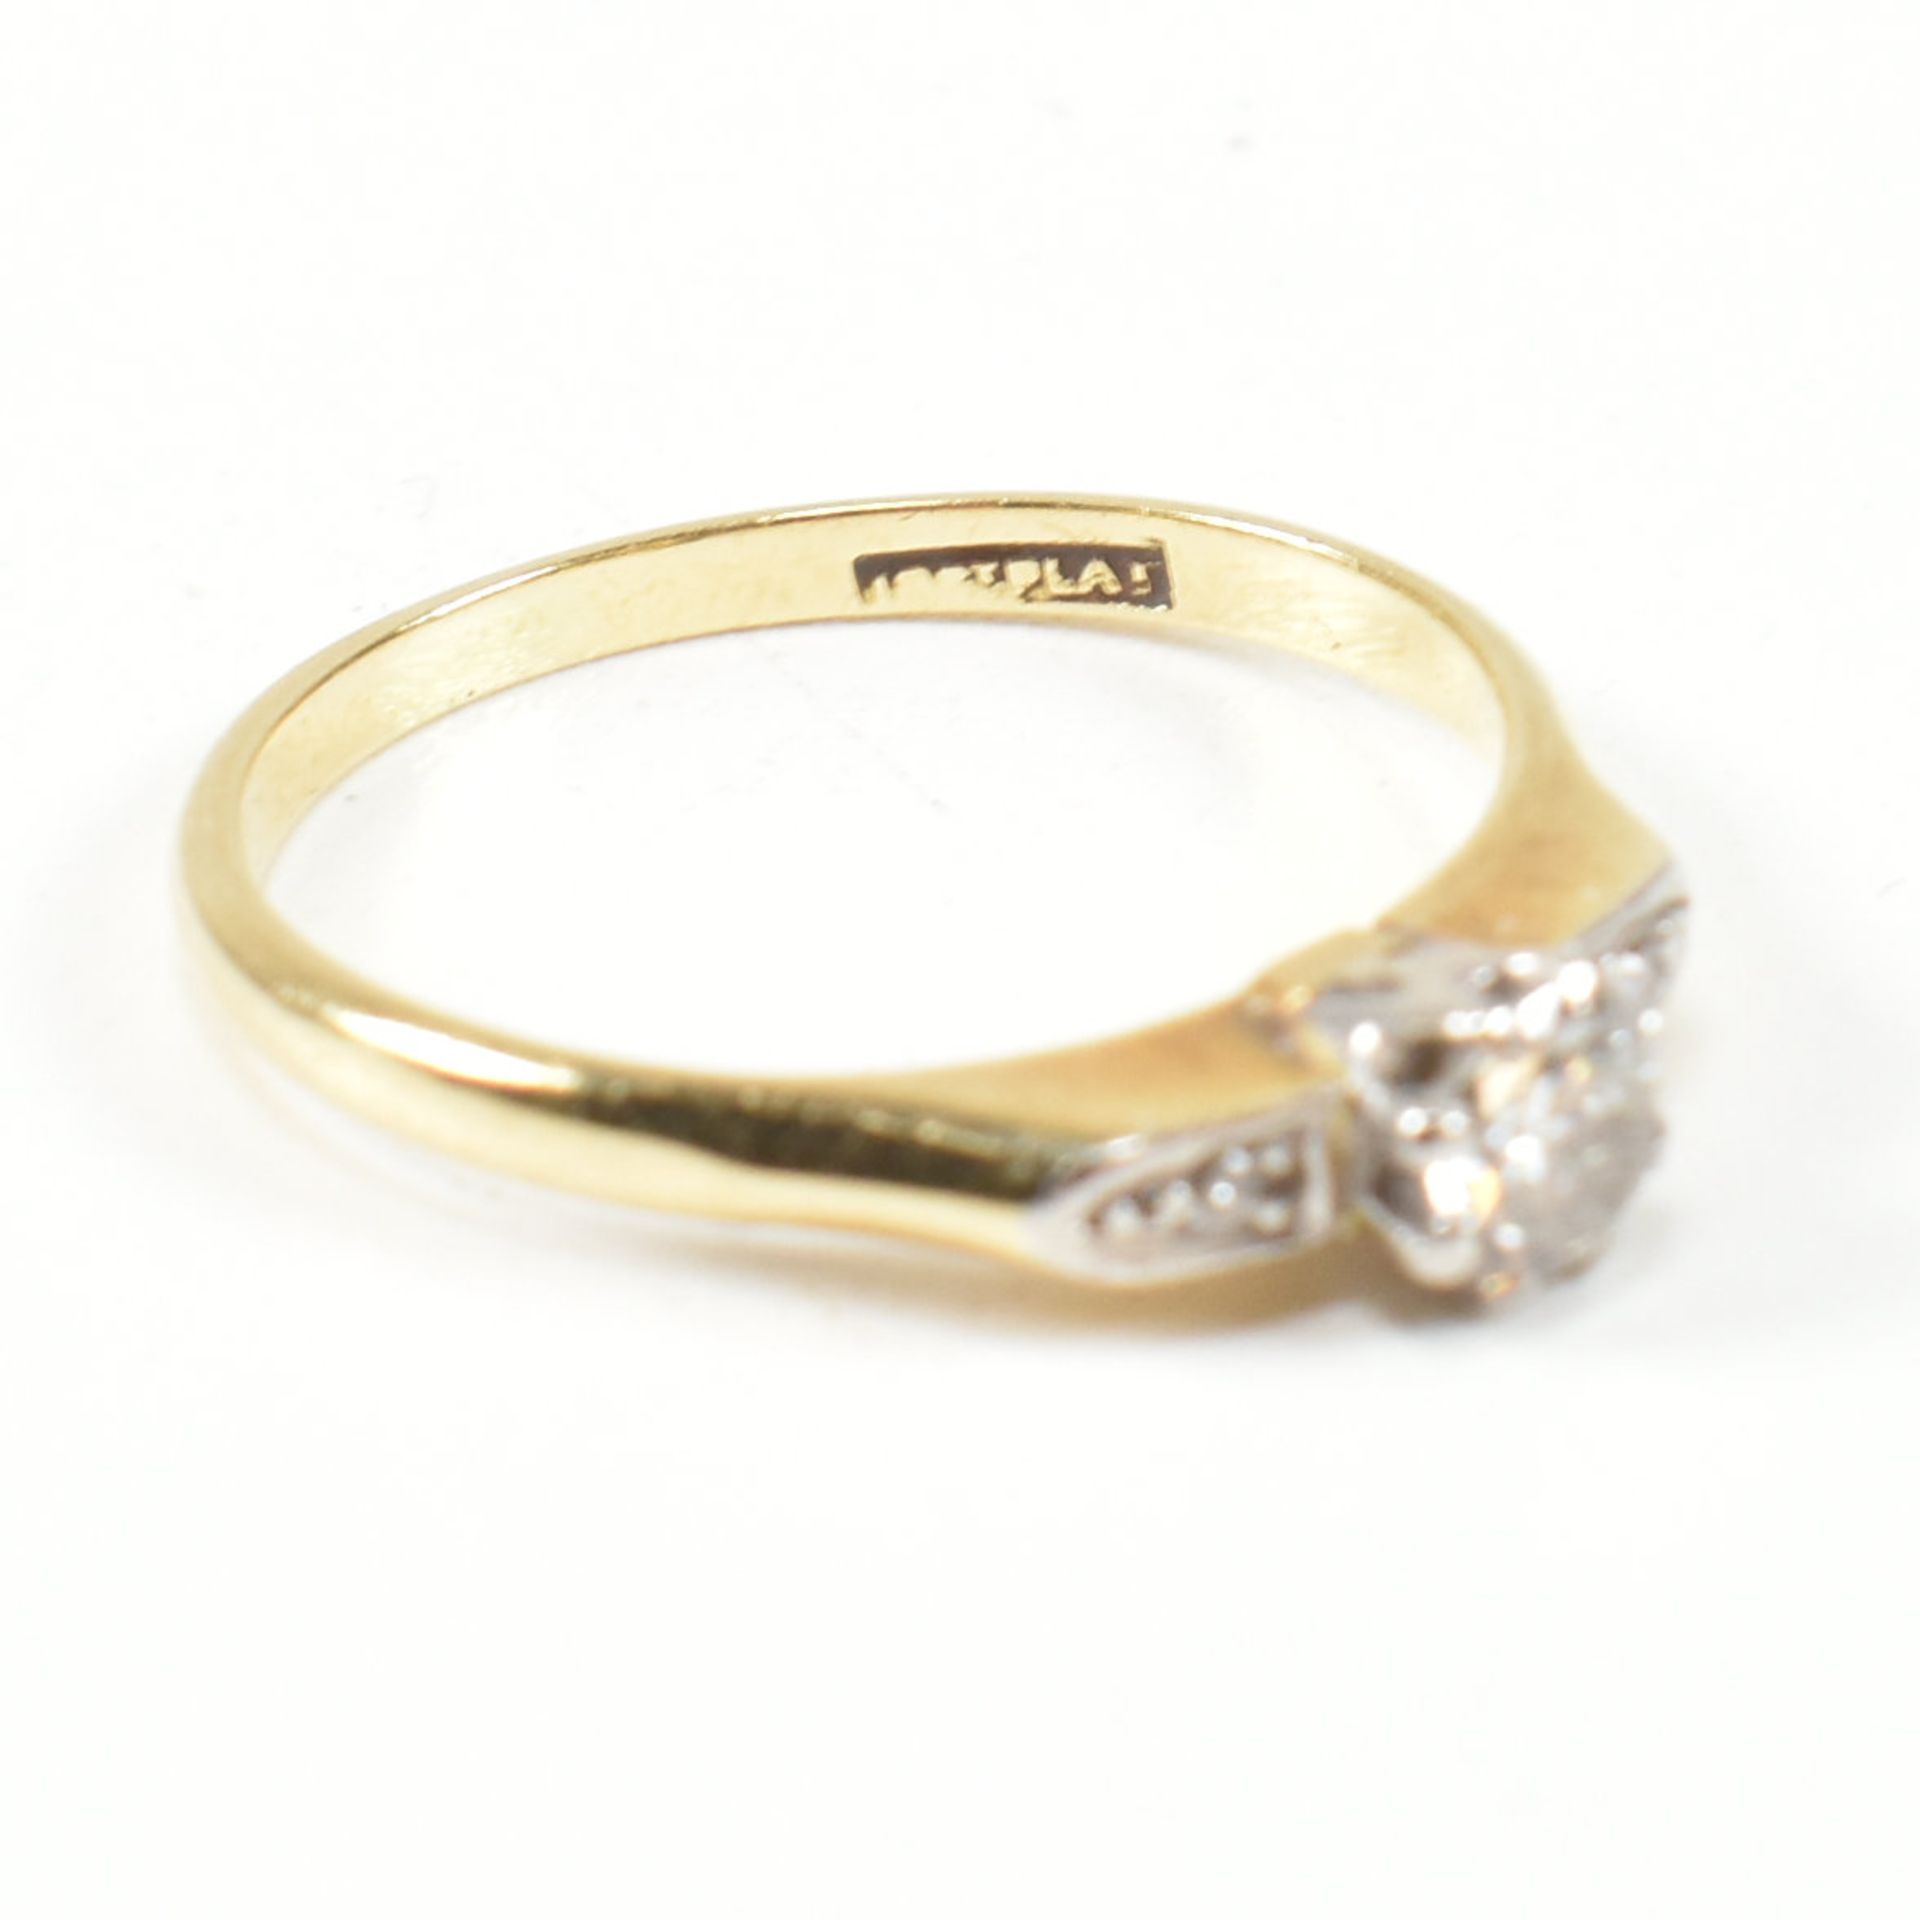 18CT GOLD & DIAMOND SOLITAIRE RING - Image 7 of 8